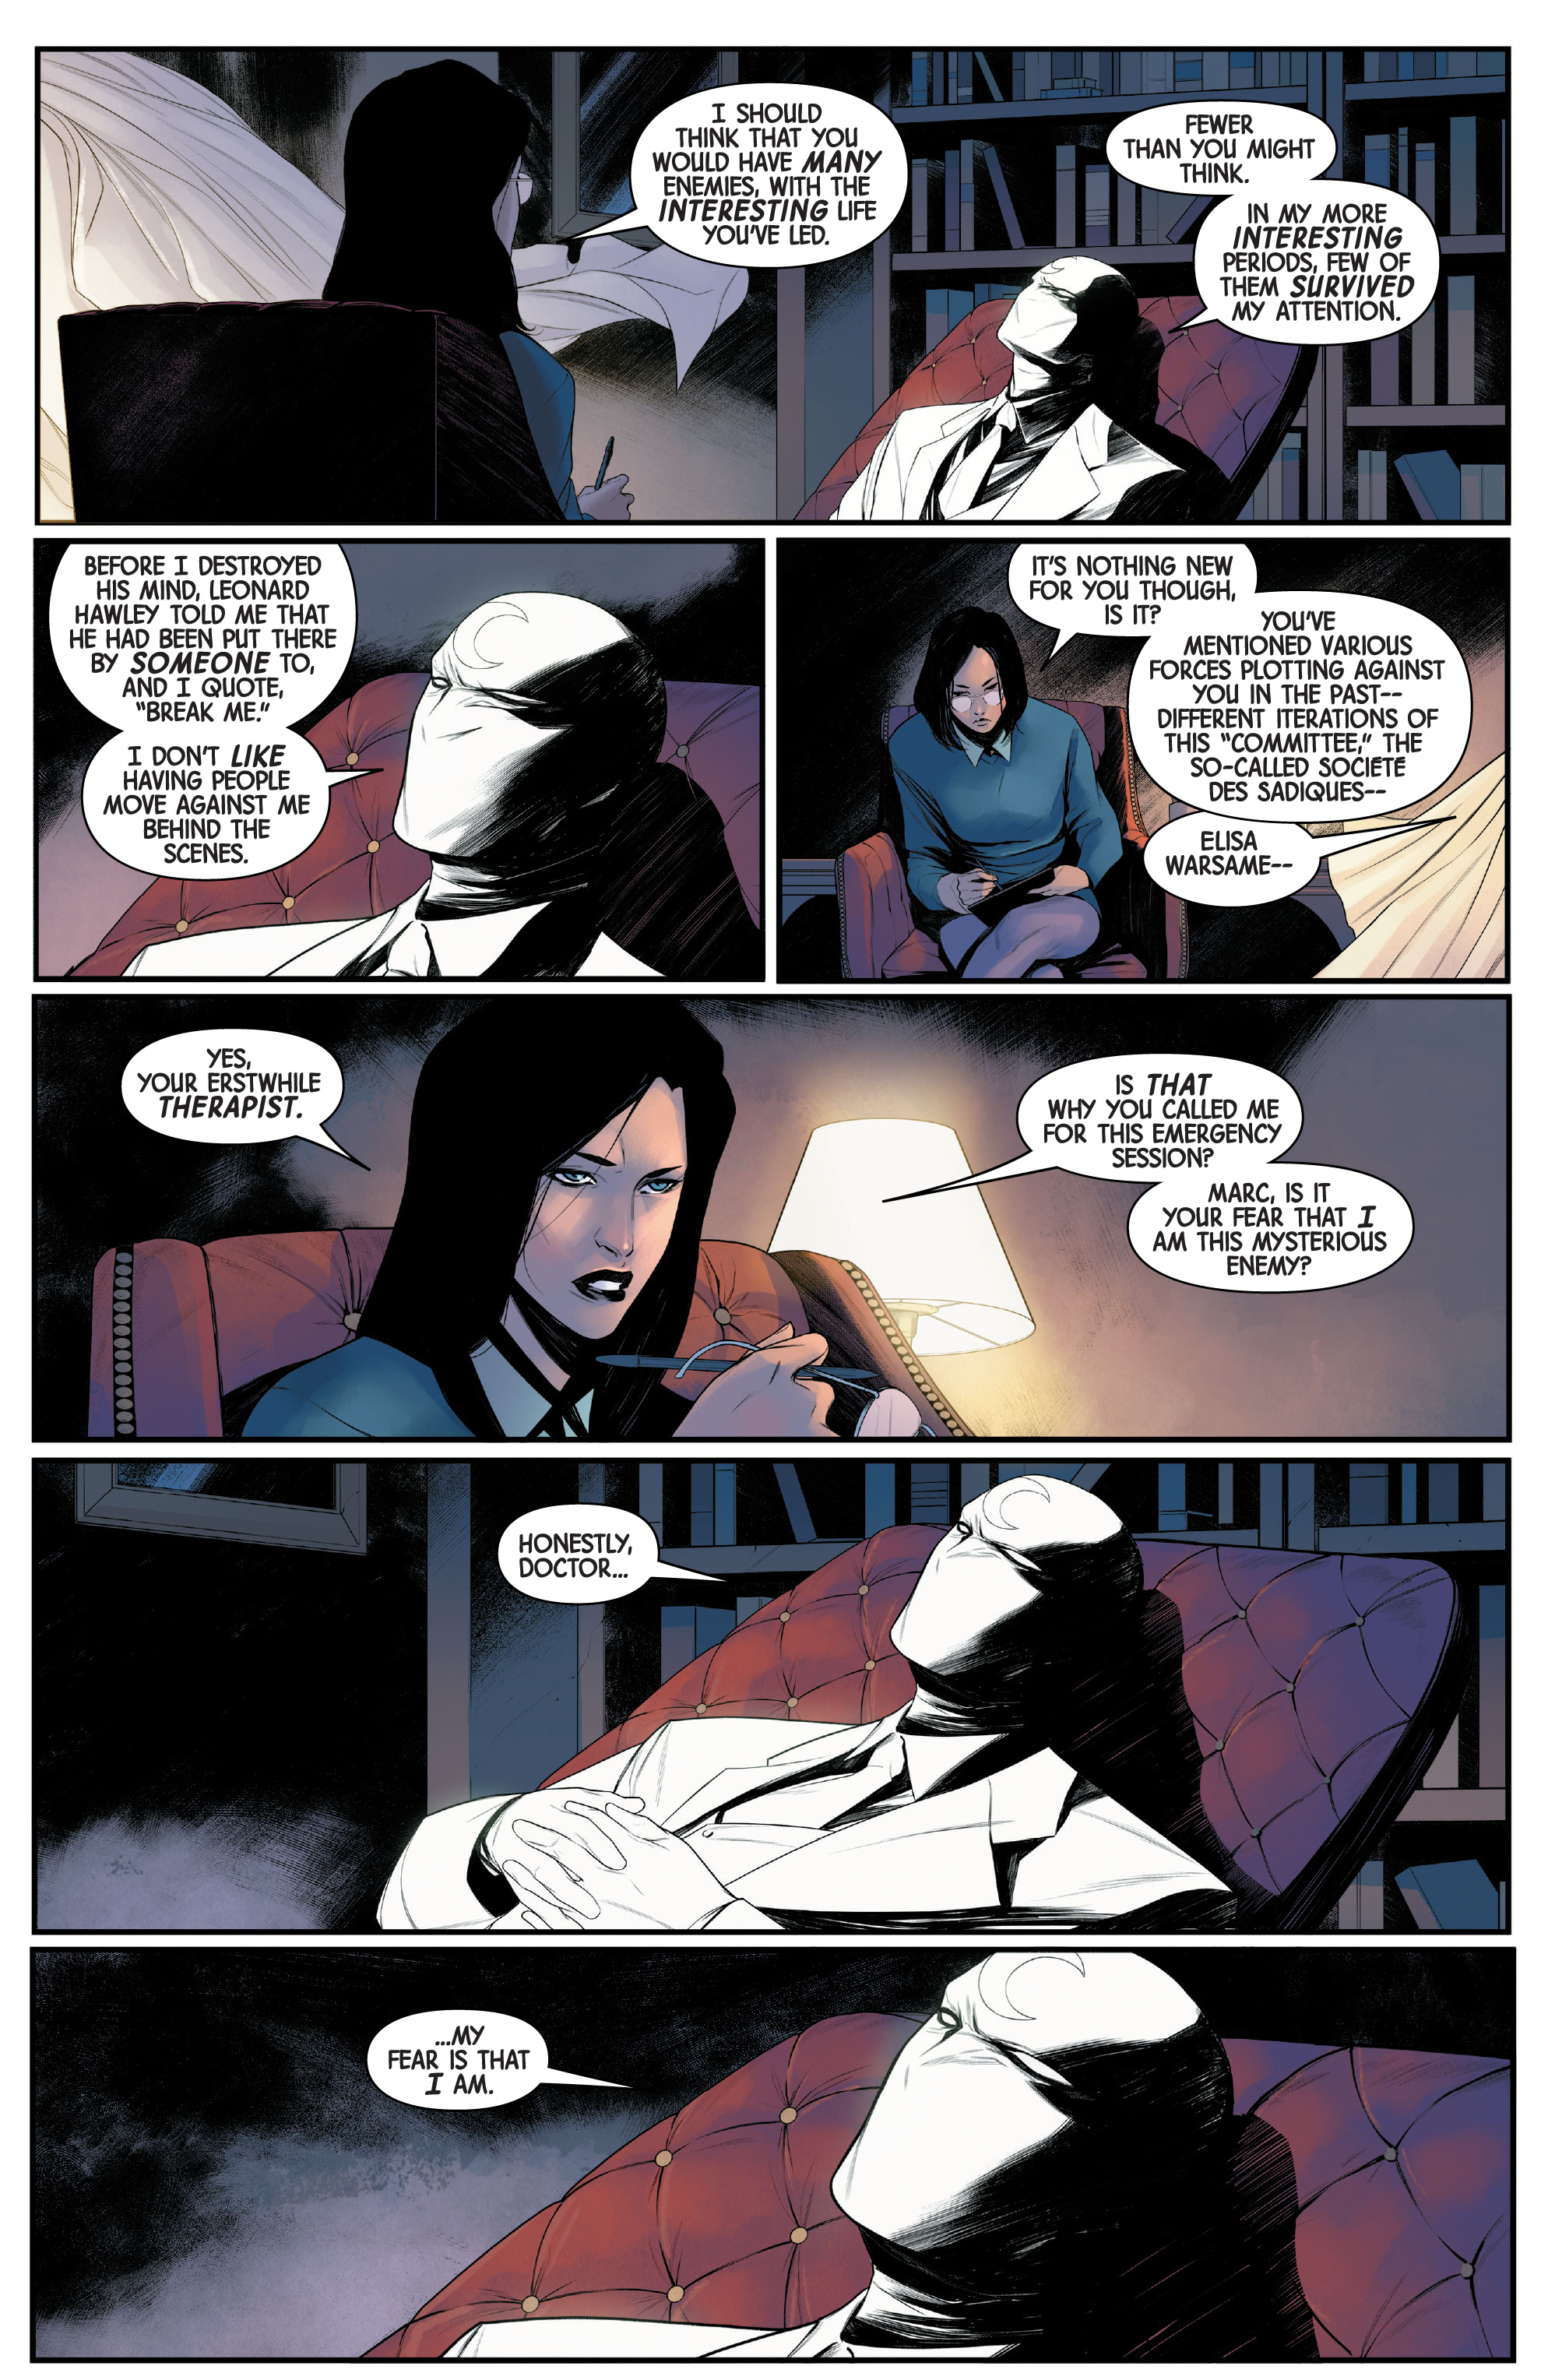 Moon Knight (2021-): Chapter 3 - Page 3